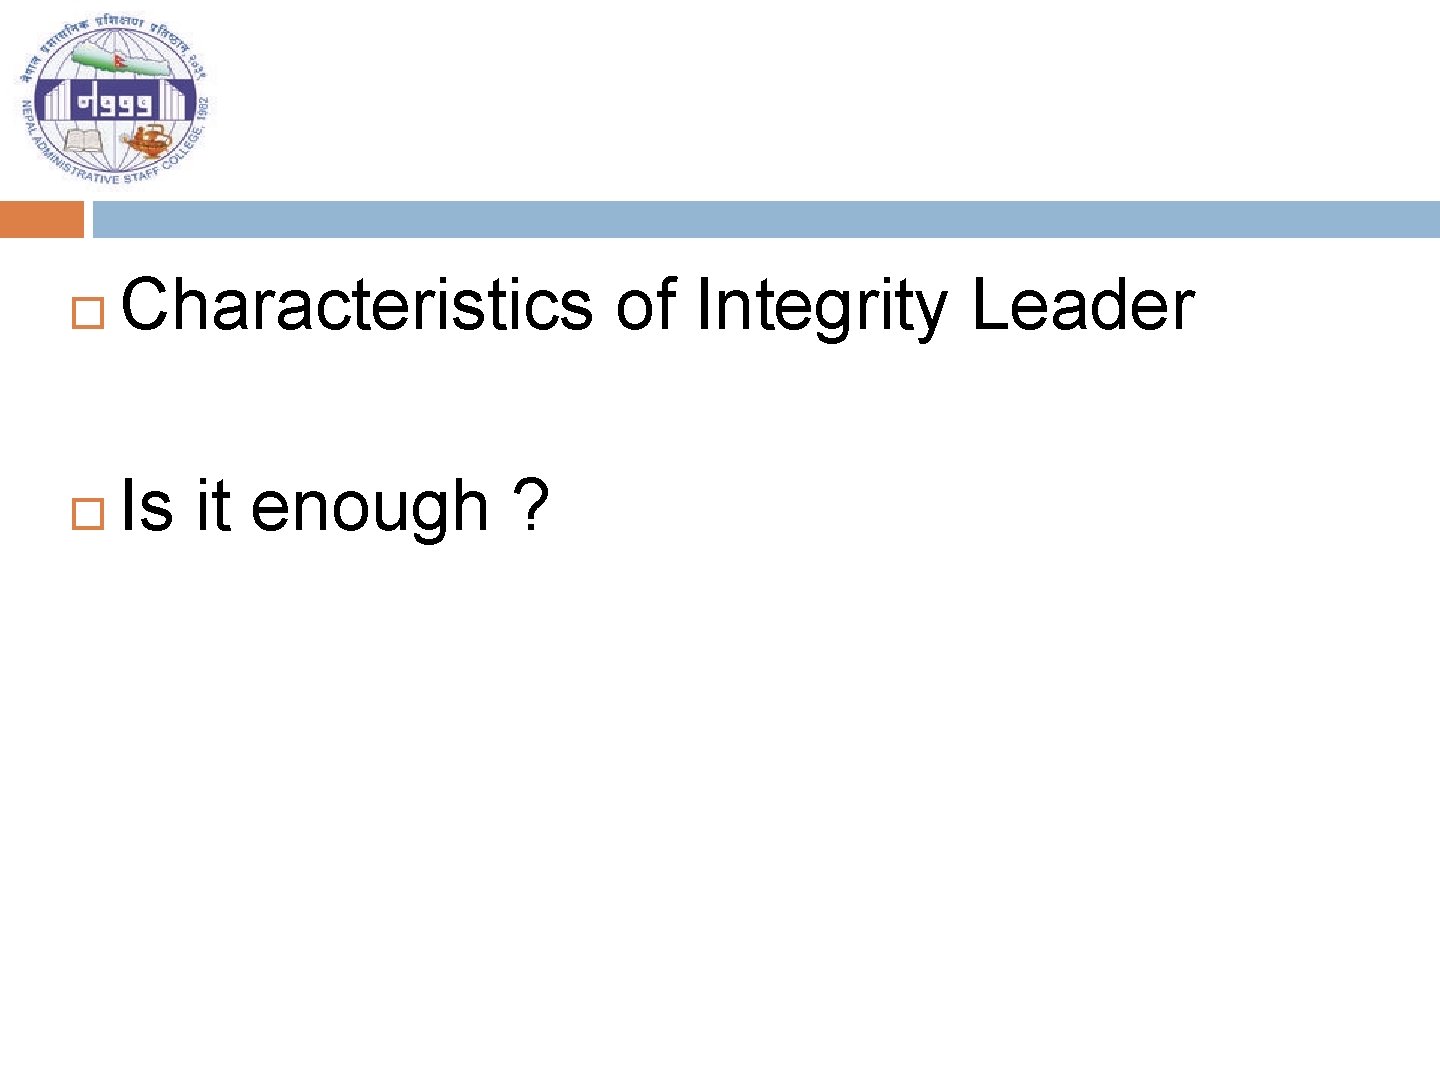  Characteristics of Integrity Leader Is it enough ? 